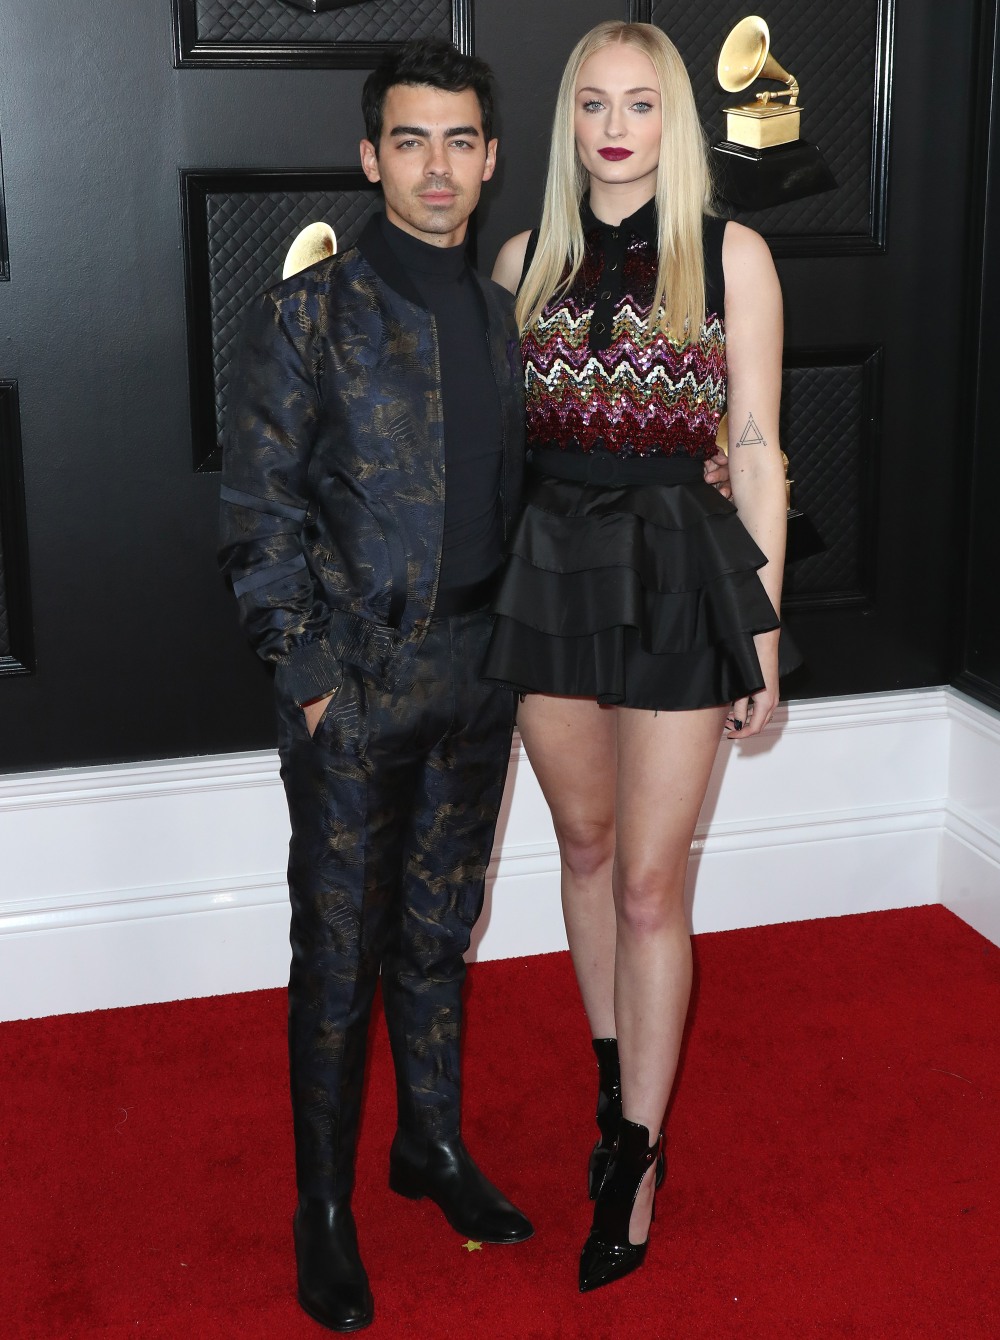 Joe Jonas and Sophie Turner arrive at the 62nd Annual GRAMMY Awards held at Staples Center on January 26, 2020 in Los Angeles, California, United States.